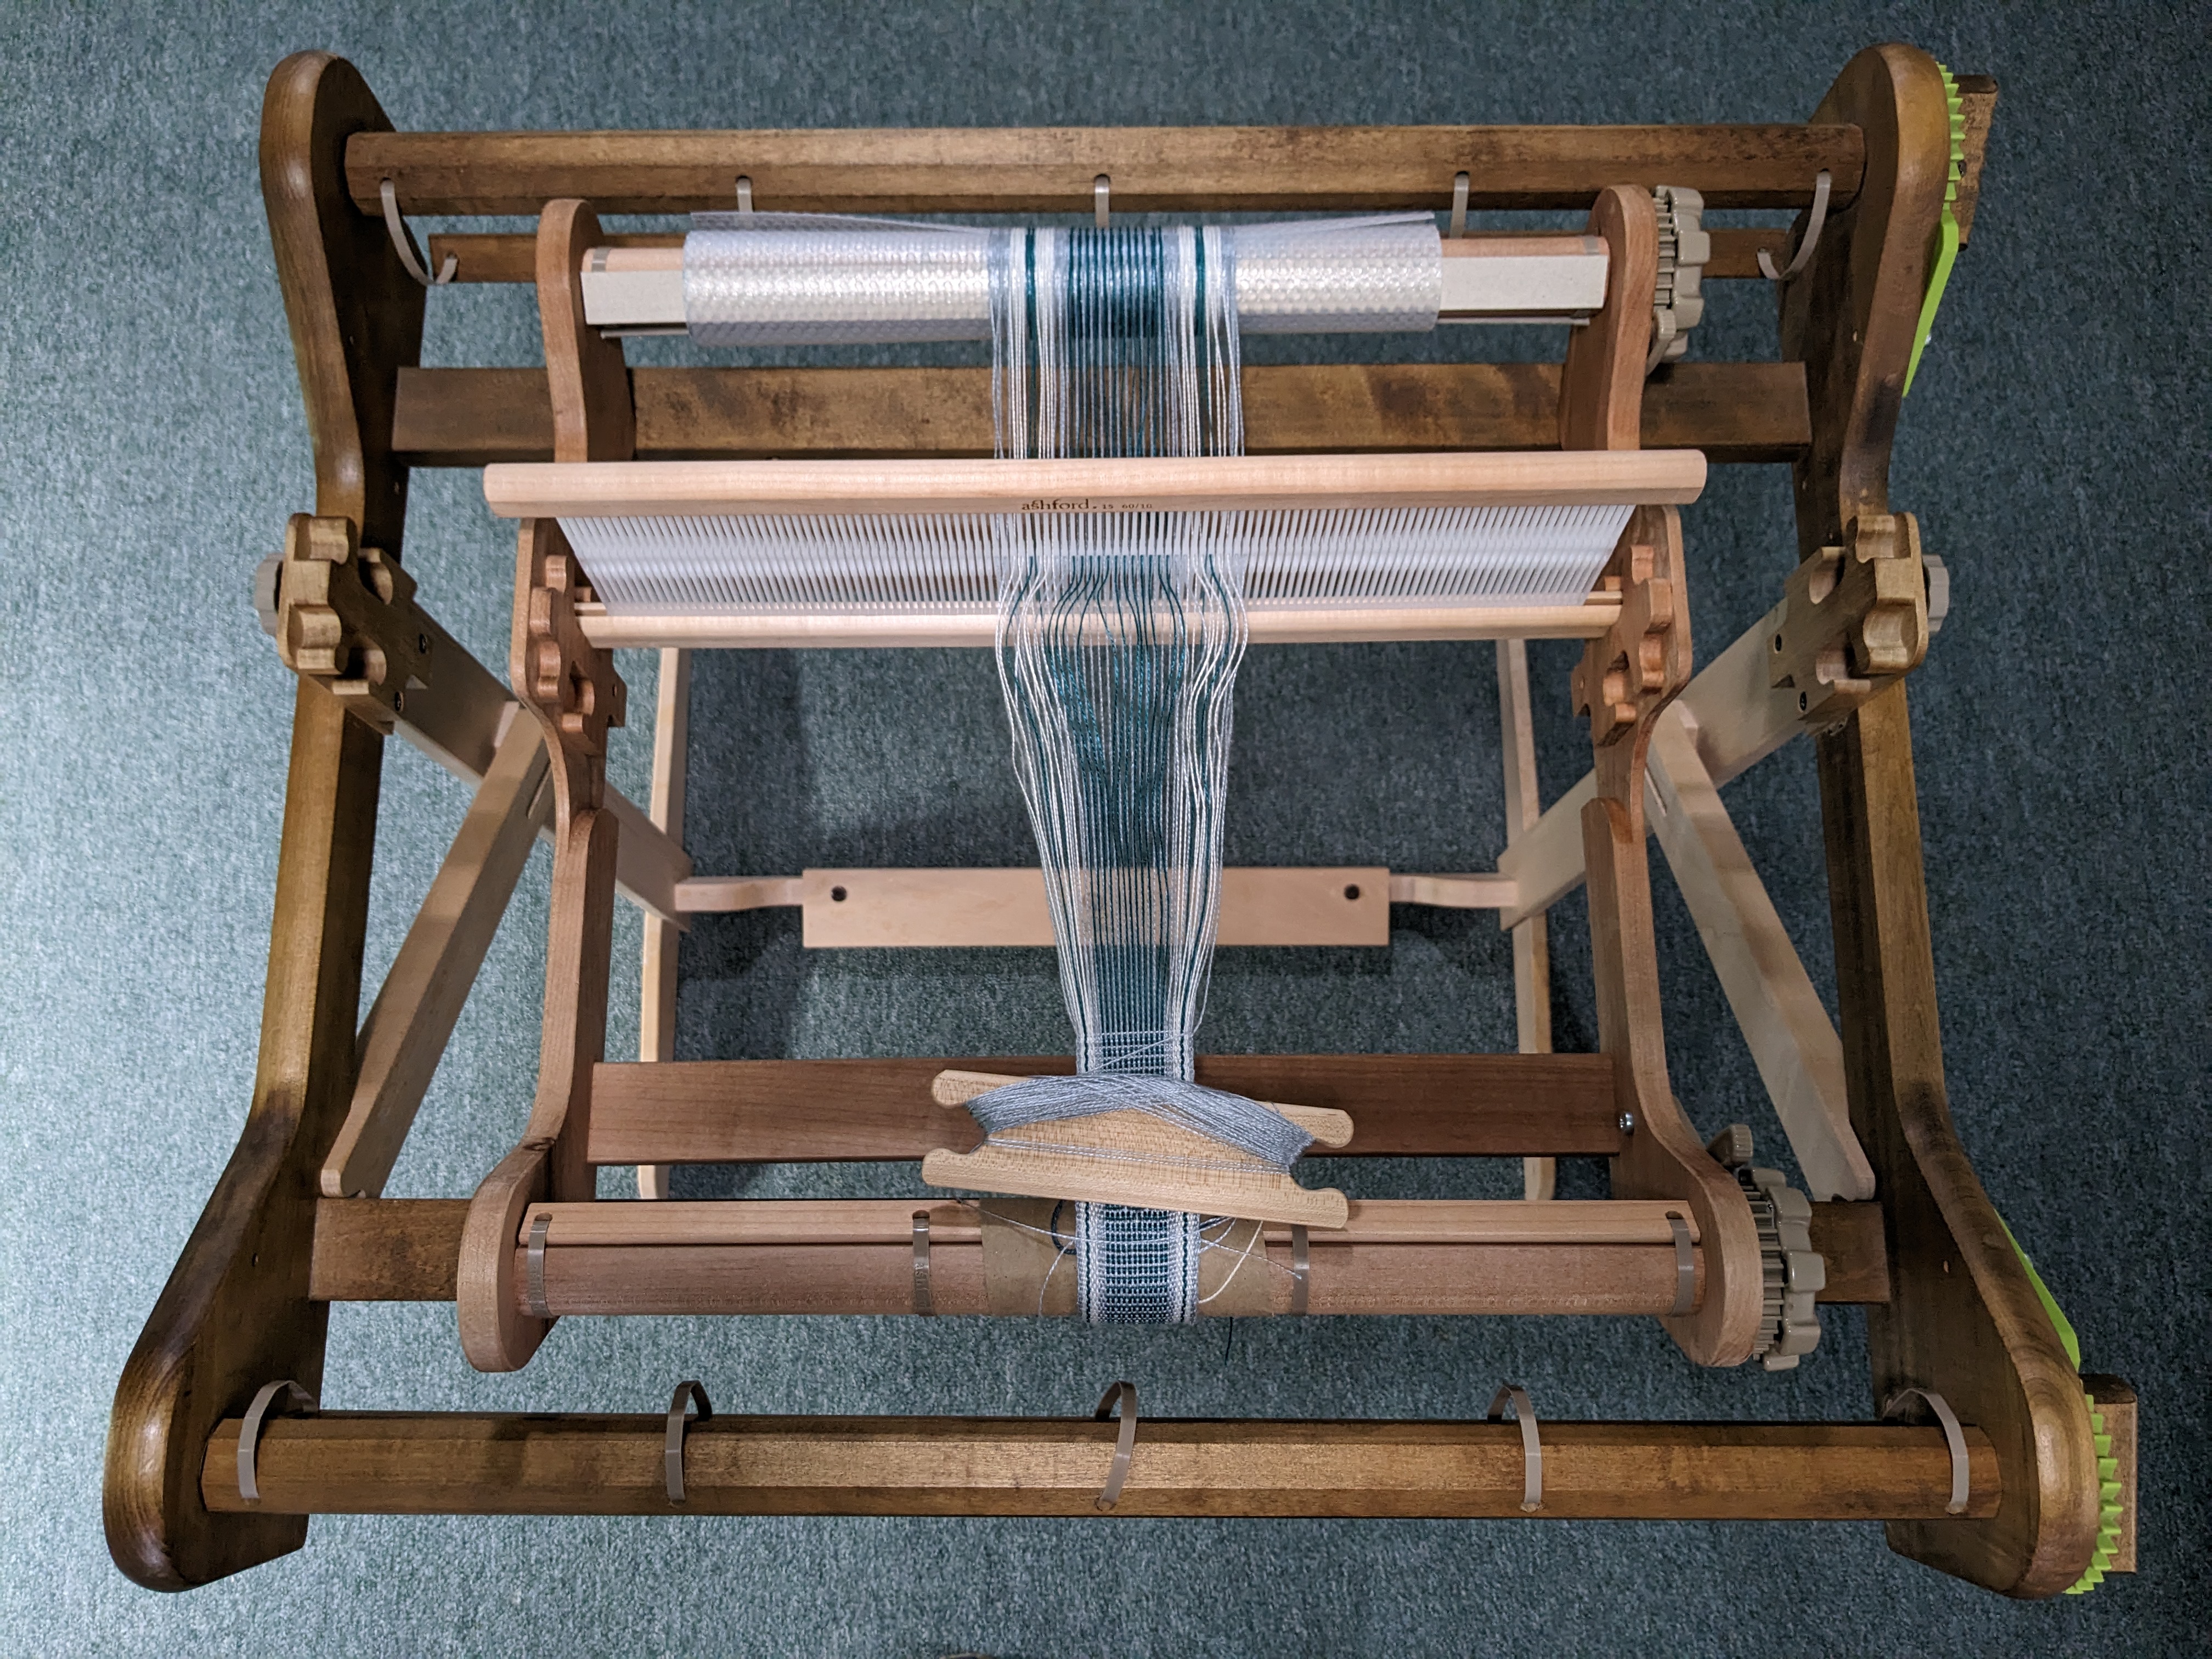 Size comparison from above with the smaller Sample-It Loom inside the 24 inch Loom